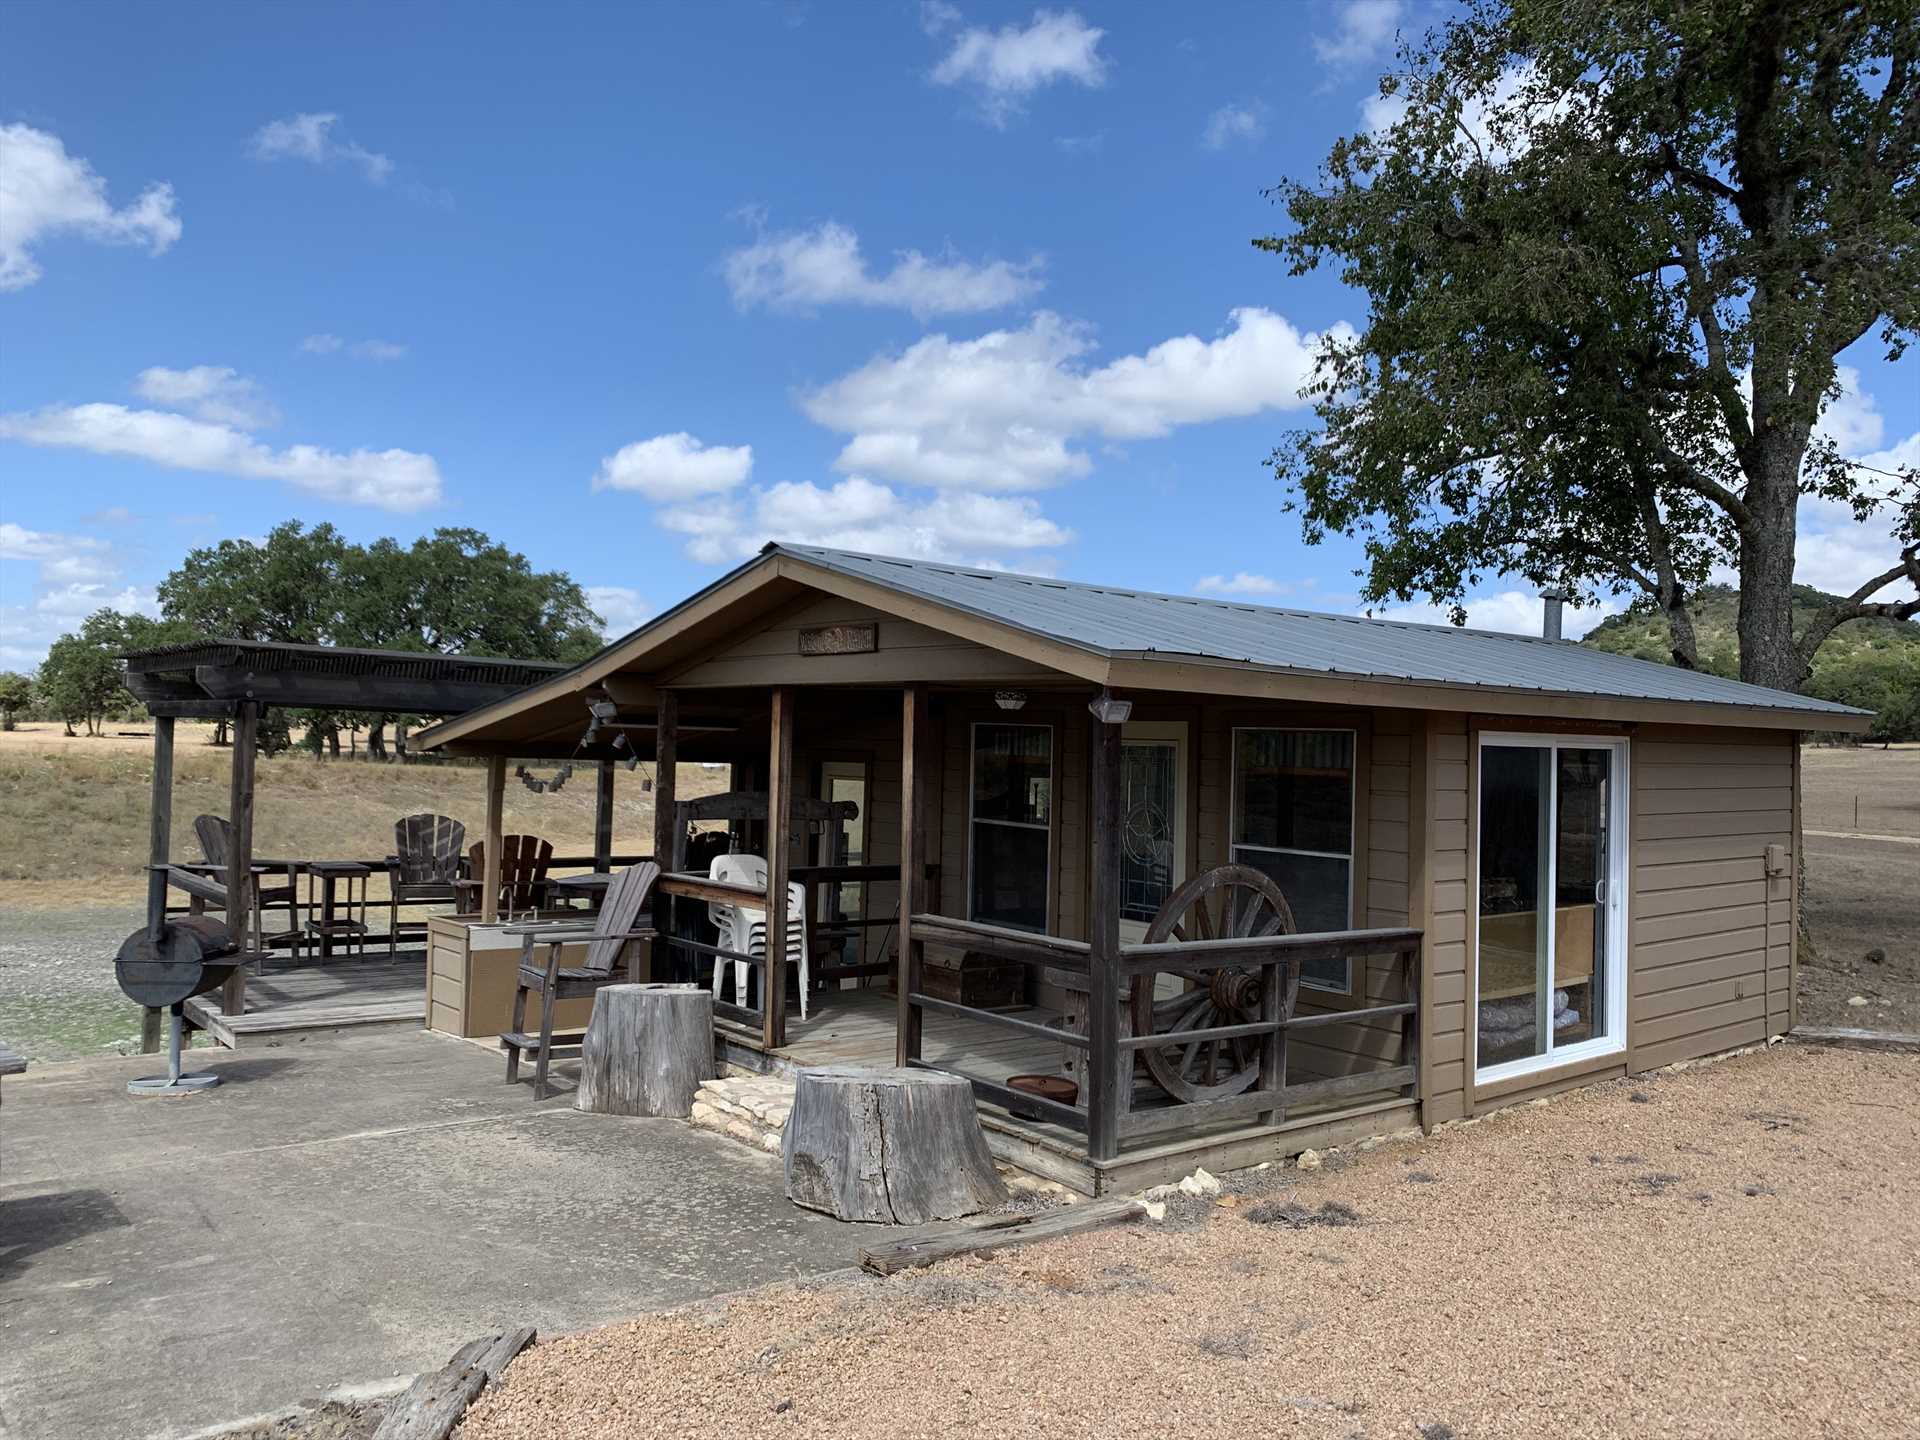                                                 All guests at Tabasco Ranch share the common space of the pavilion, and there's plenty of room for everyone.